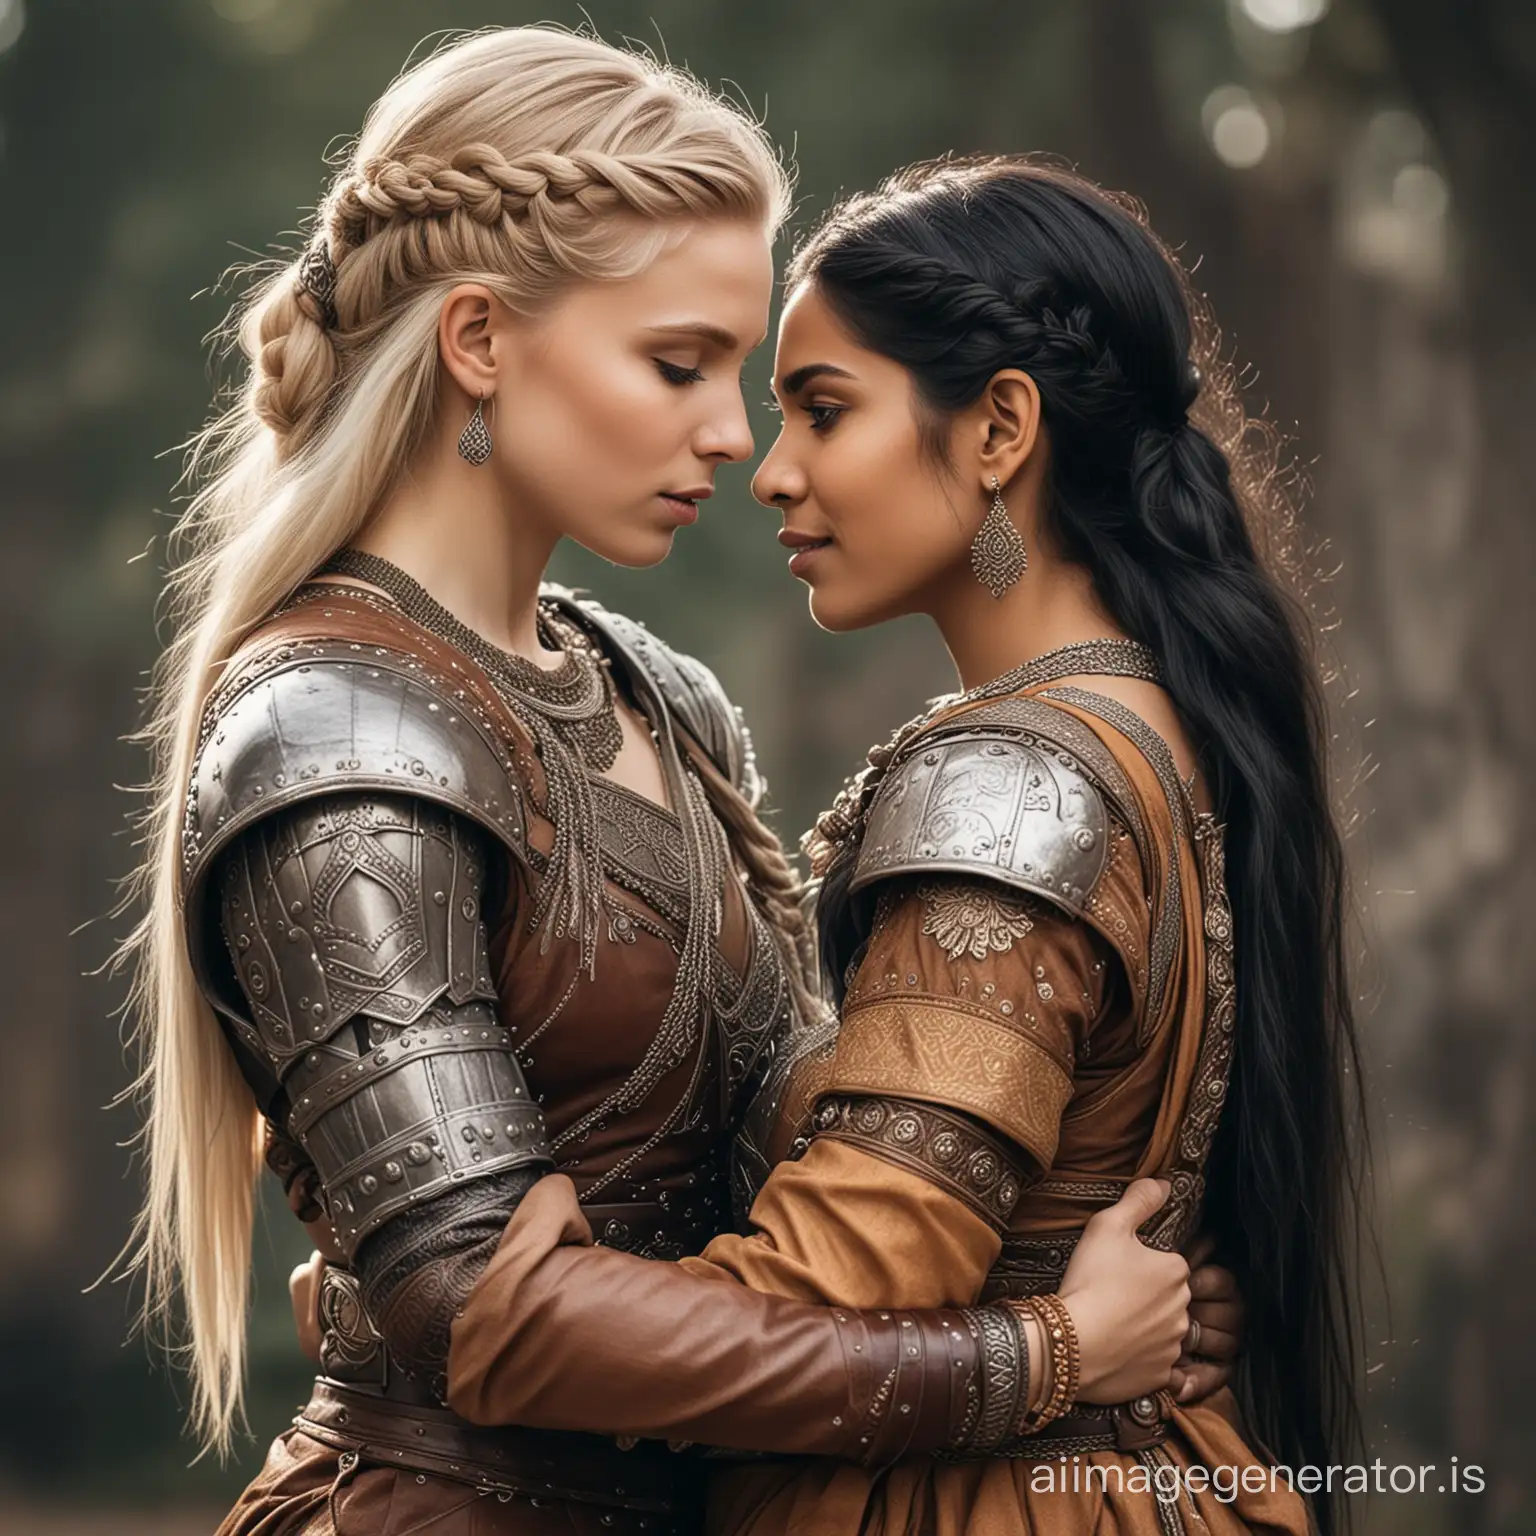 two princesses a fit beautiful long black hair Indian princess dressed in a beautiful sari hugs her lover, a Nordic Viking female warrior, pale white skin with brown pixie cut hair dressed in leather armor no men in picture